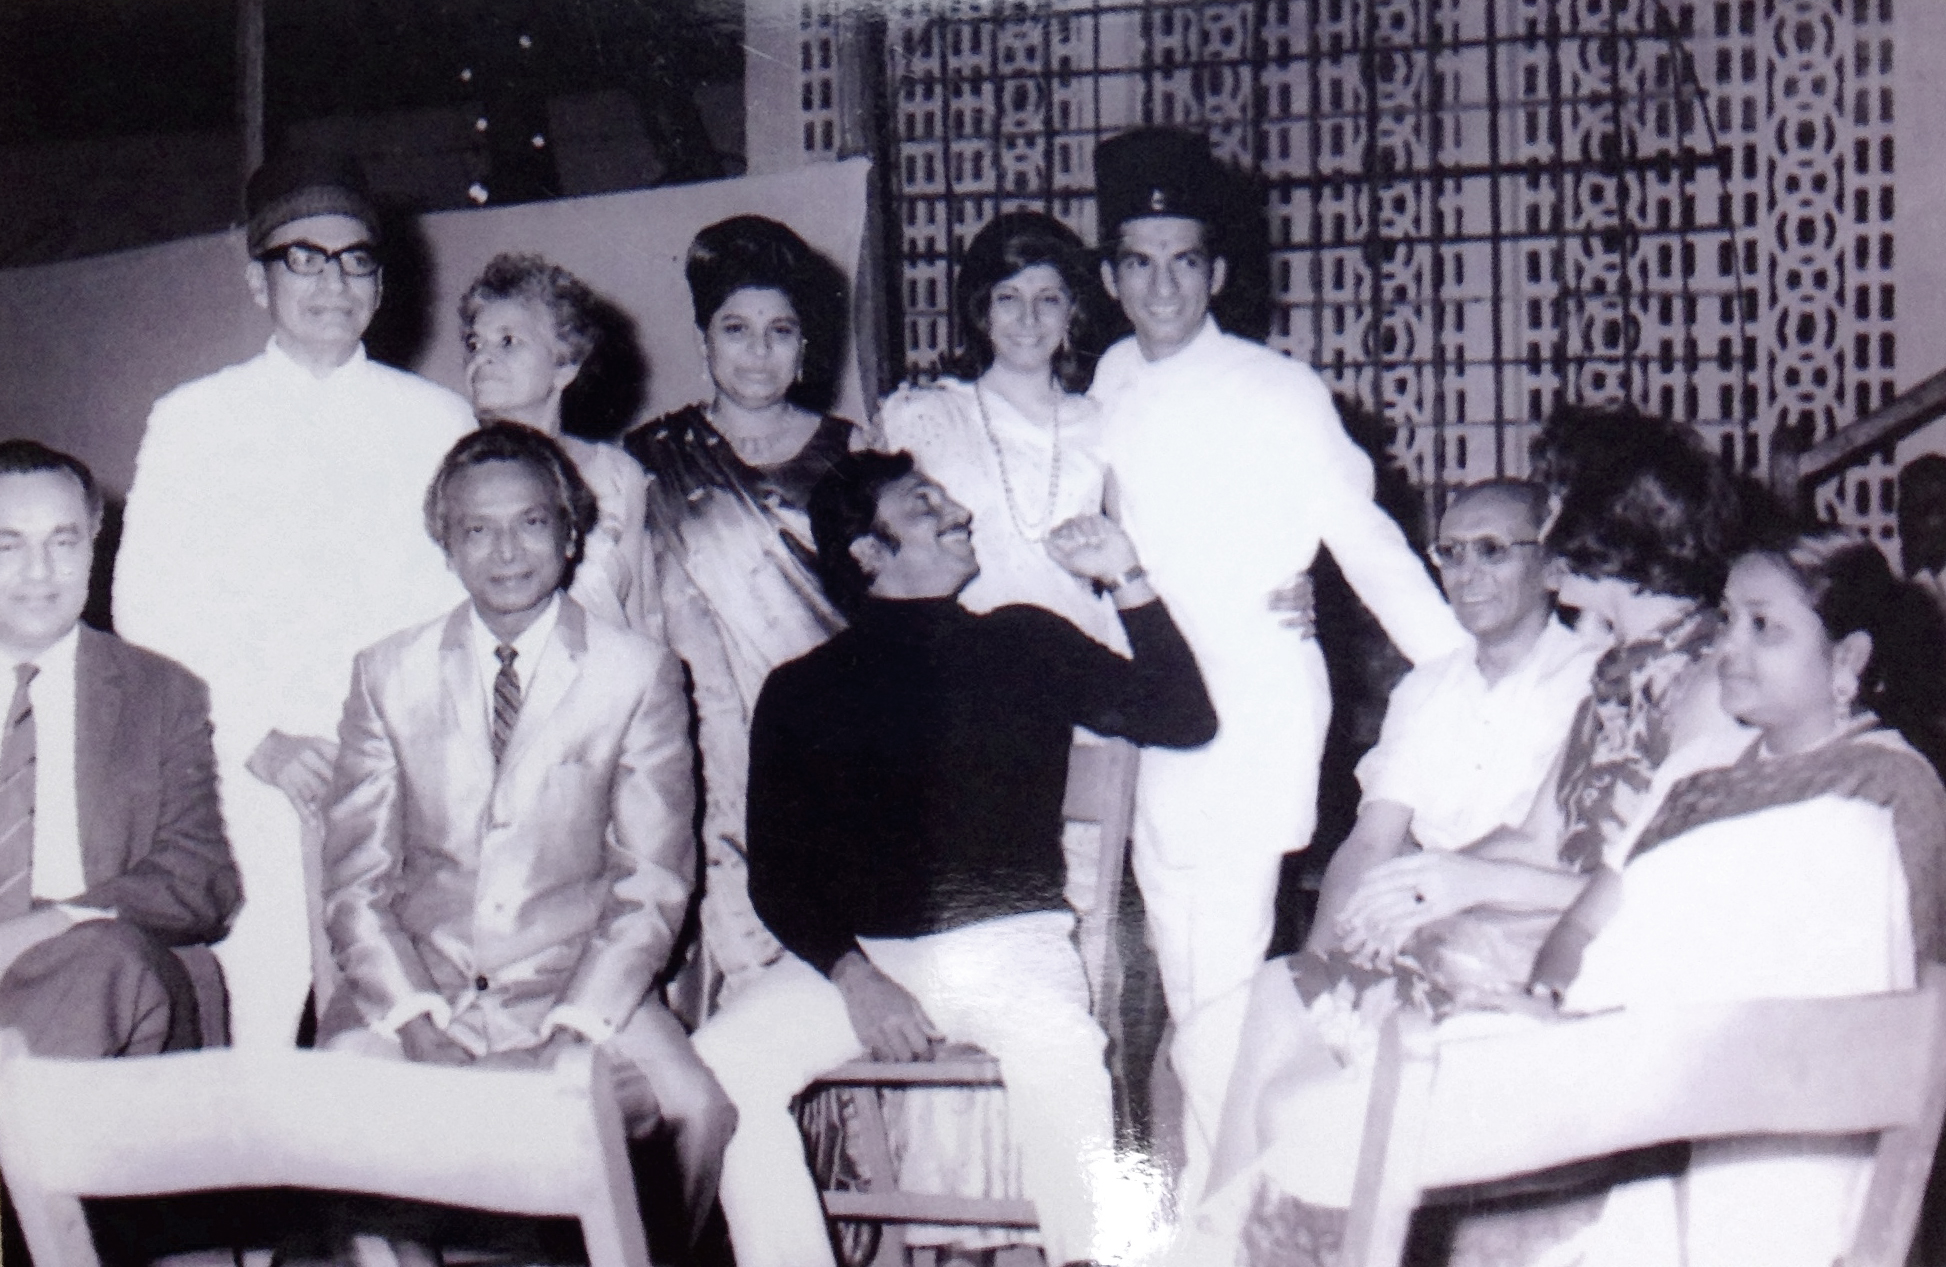 Madanmohan with Naushad, Mukesh, Jaidev & others in a ceremony